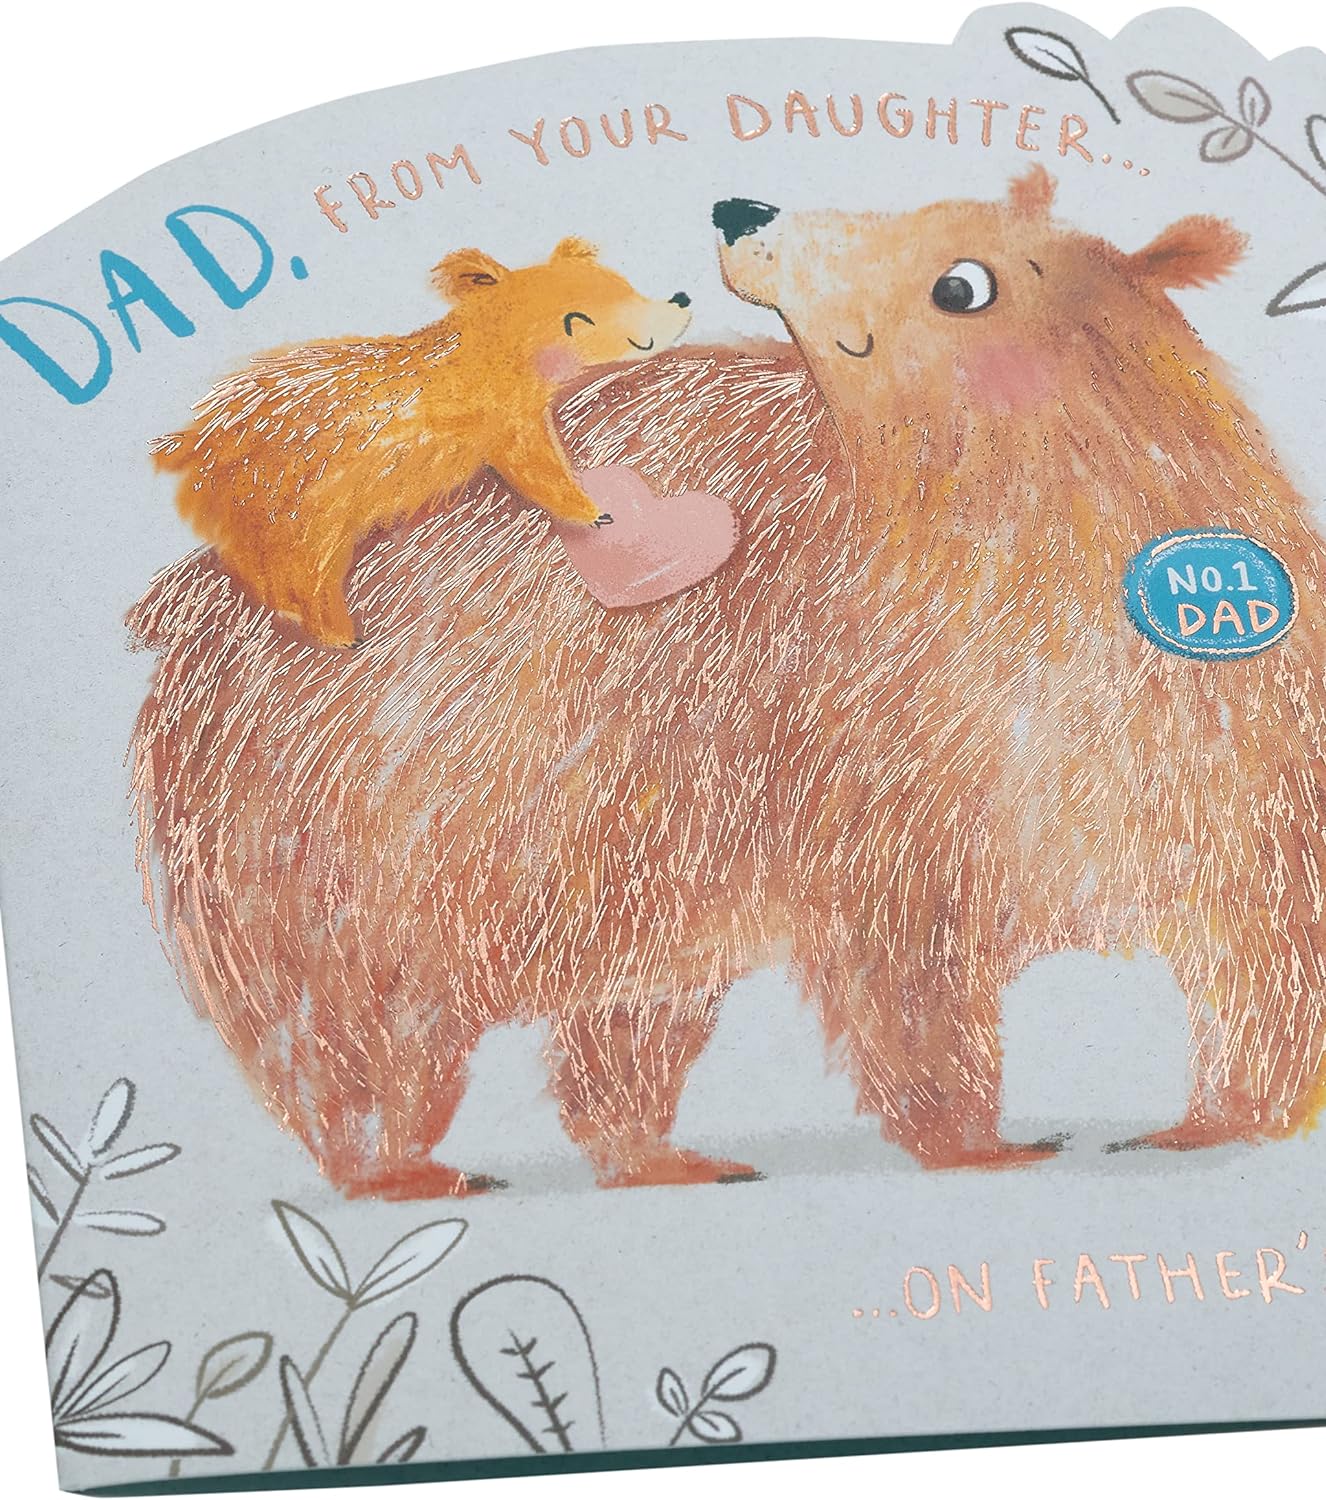 Cute Bear Design From Daughter Father's Day Card 